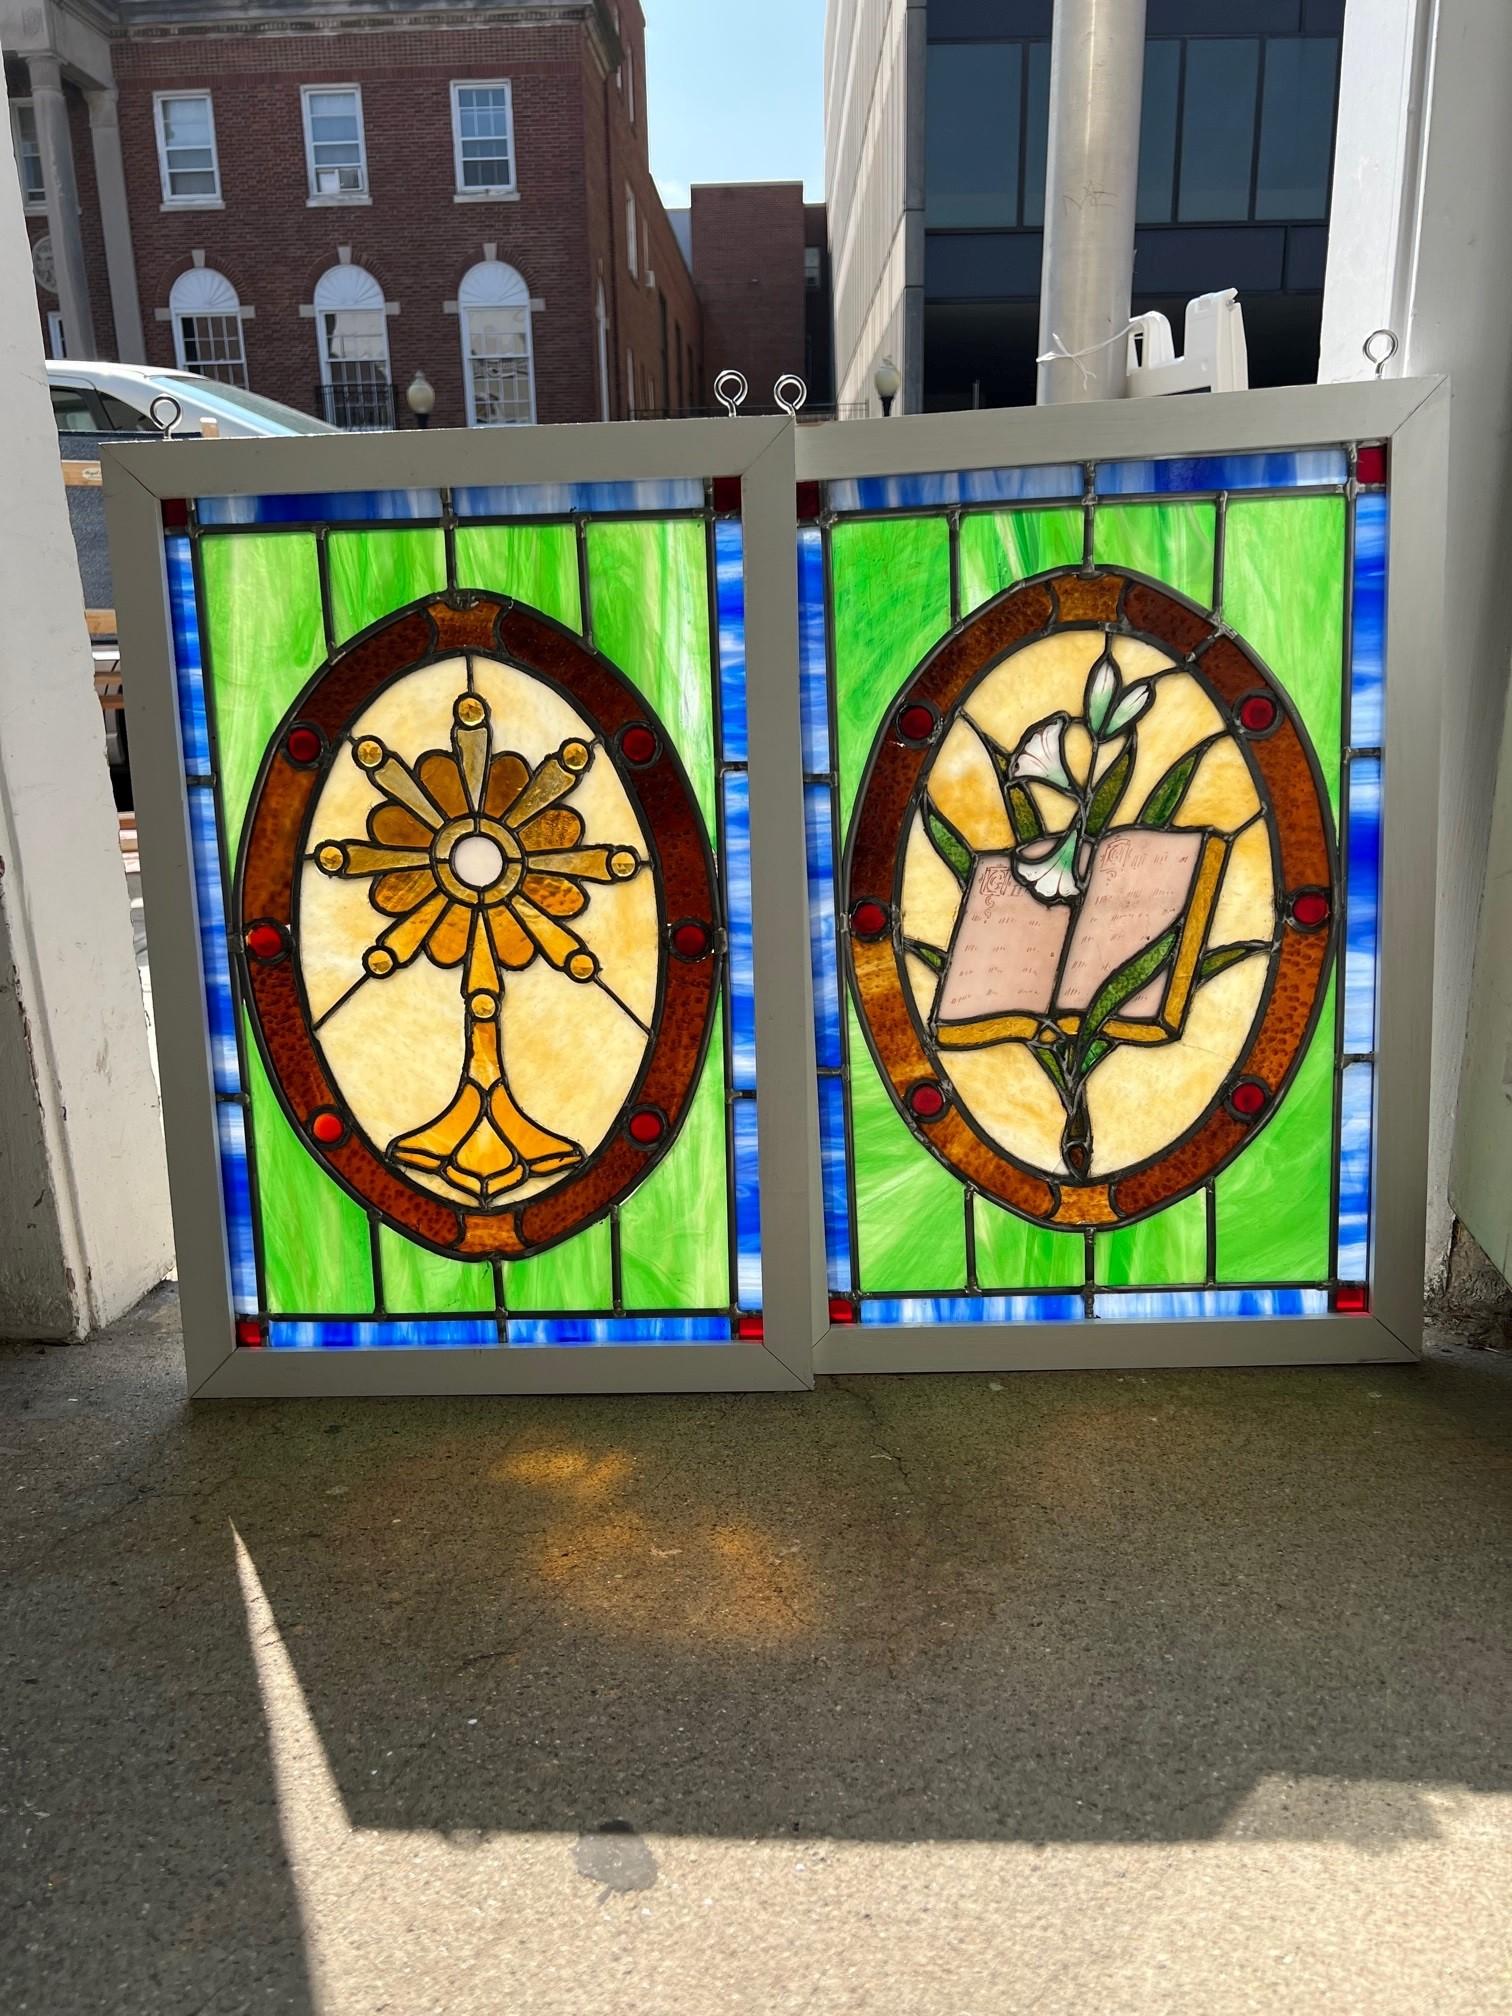 Mid 20th Century pair of stained glass religious windows with new wood frames. This is a nice pair of windows from larger stained glass window that was damaged. One has a monstrance also known as an ostensorium which is the vessel used in the Roman